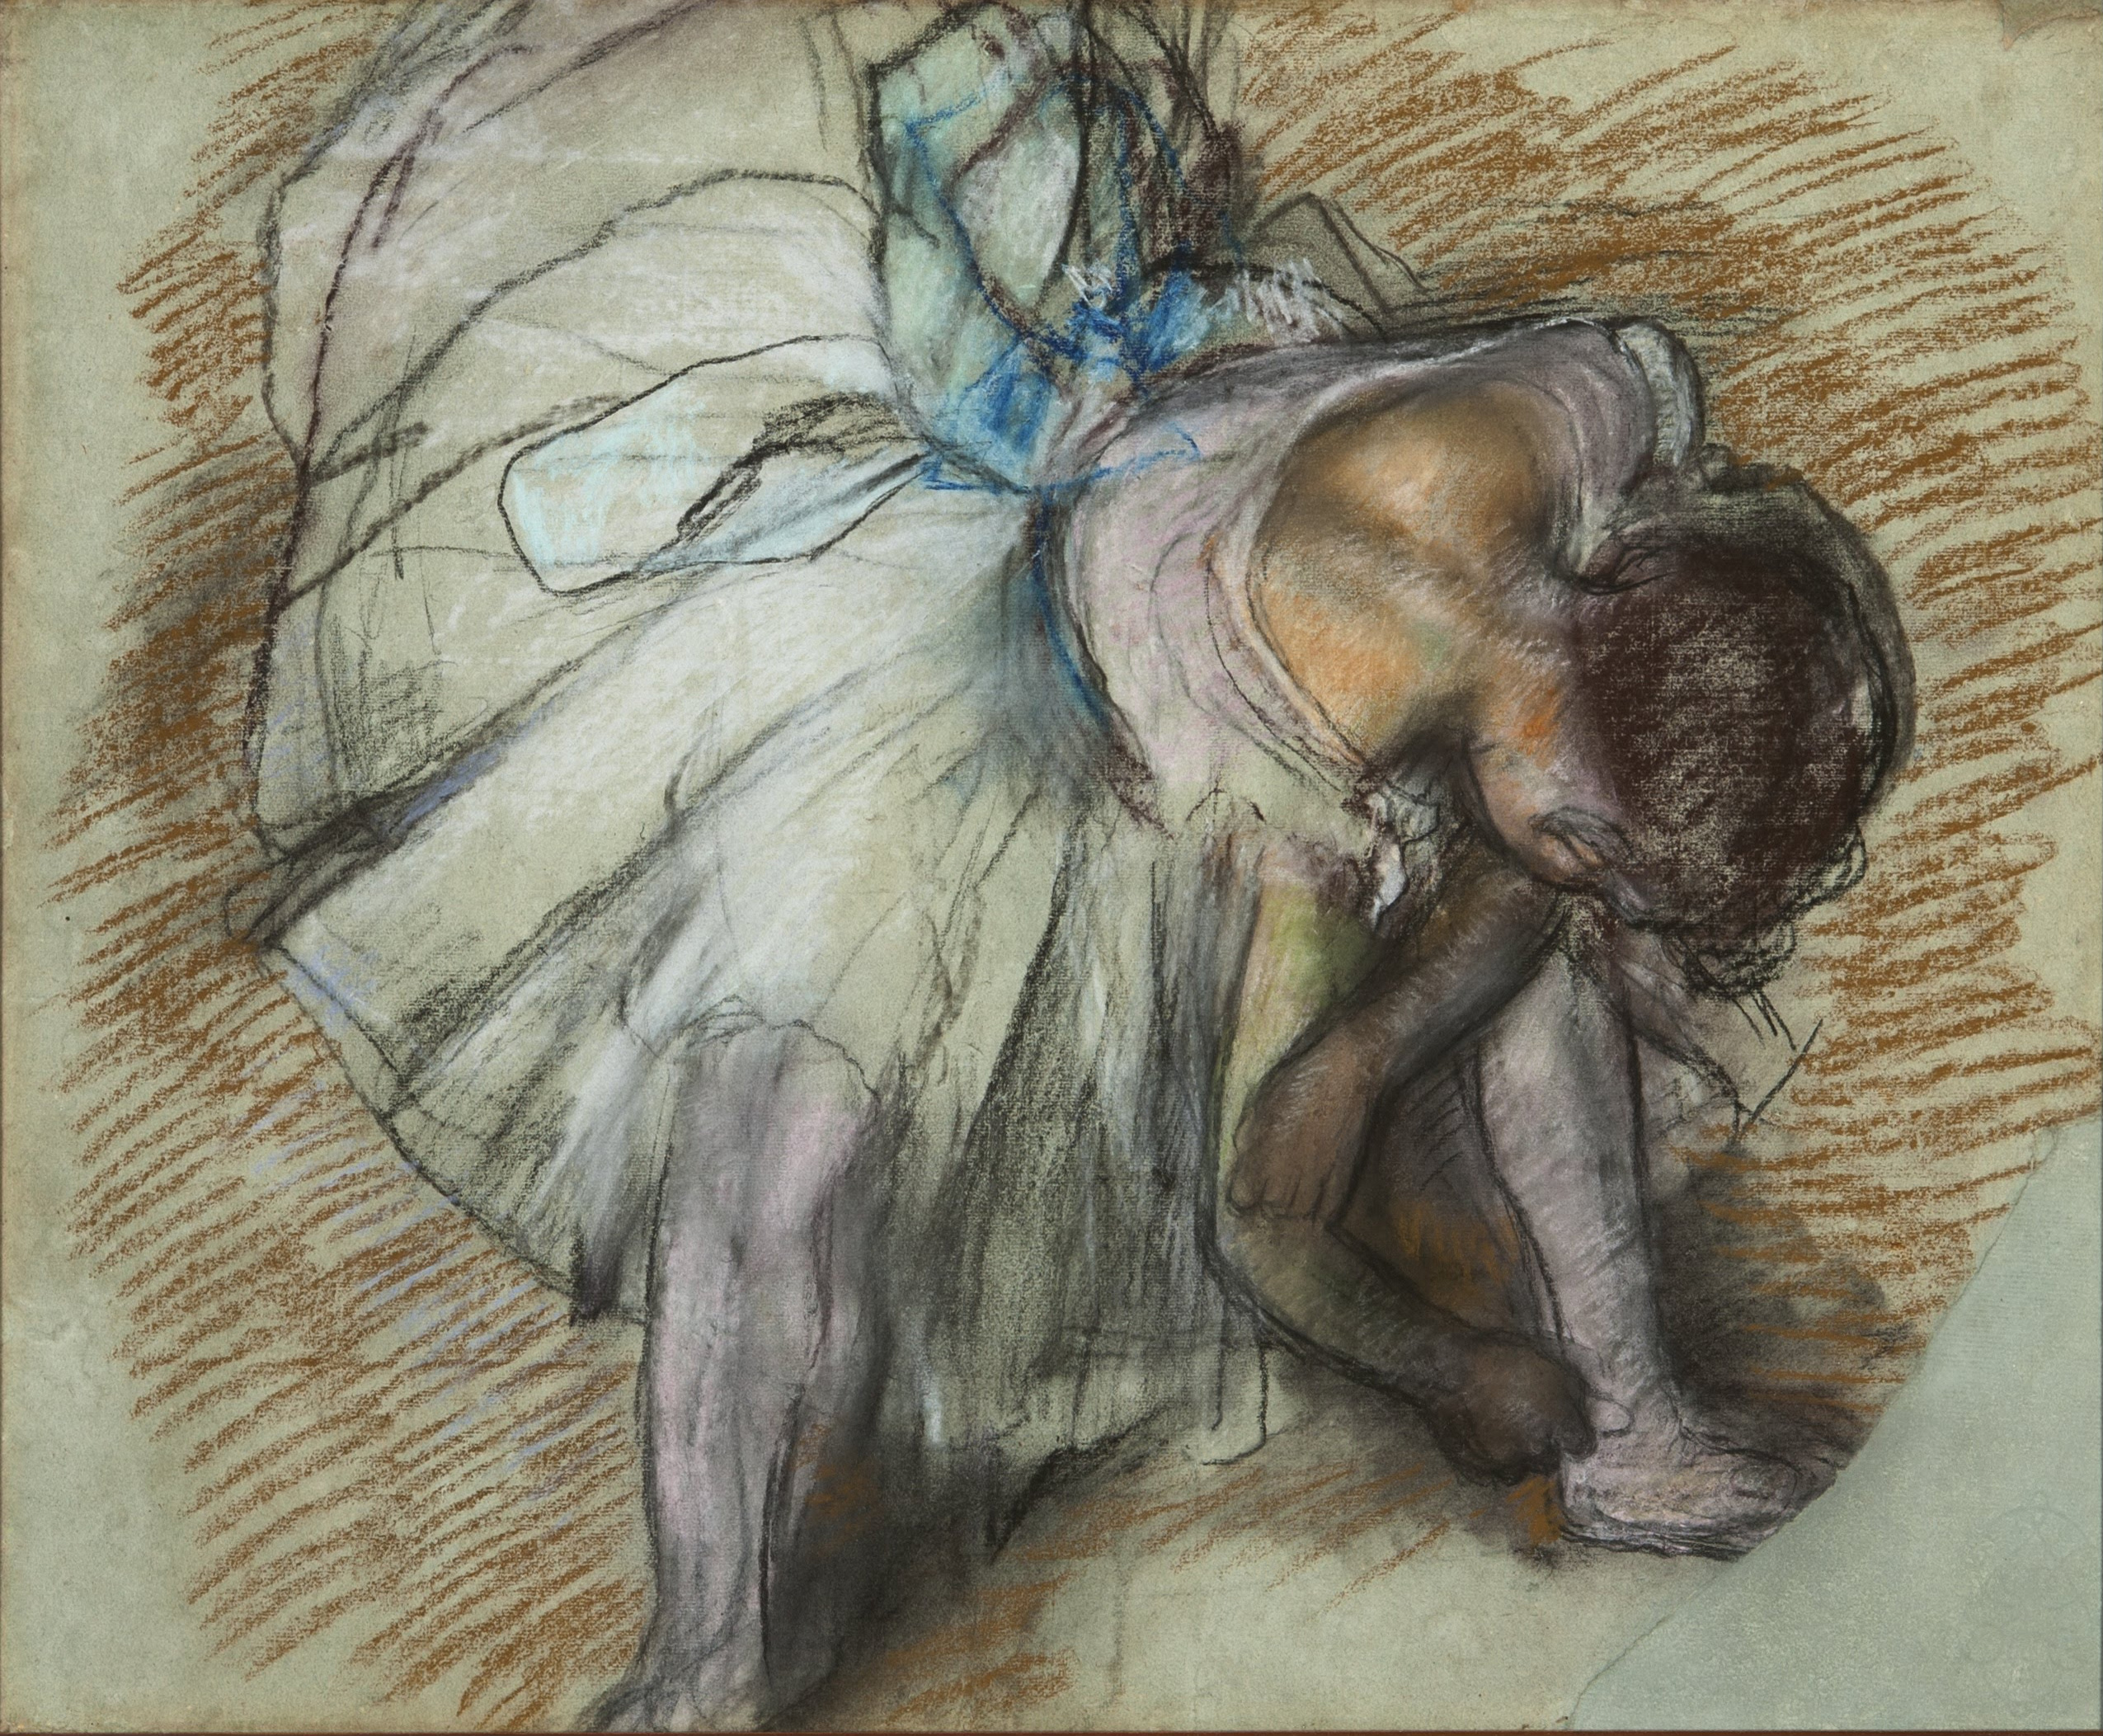 Dancer Adjusting Her Shoe by Edgar Degas - 1885 - 18 3/4 x 23 1/2 inches Dixon Gallery and Gardens